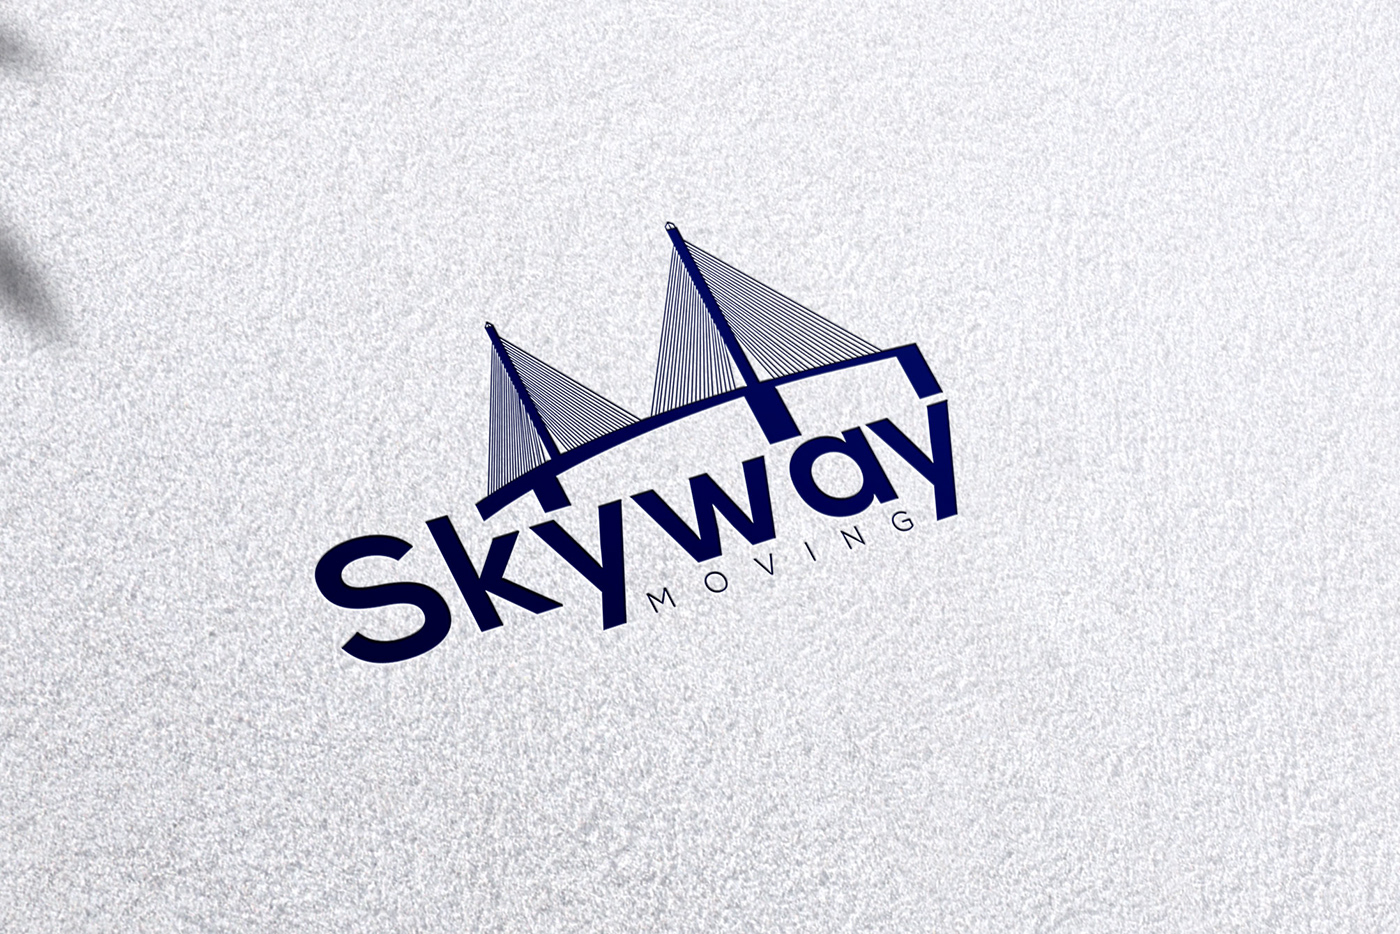 SKYWAN MOVING BUSINESS LOGO DESIGN
Please your order now to take the first step toward a remarkable 